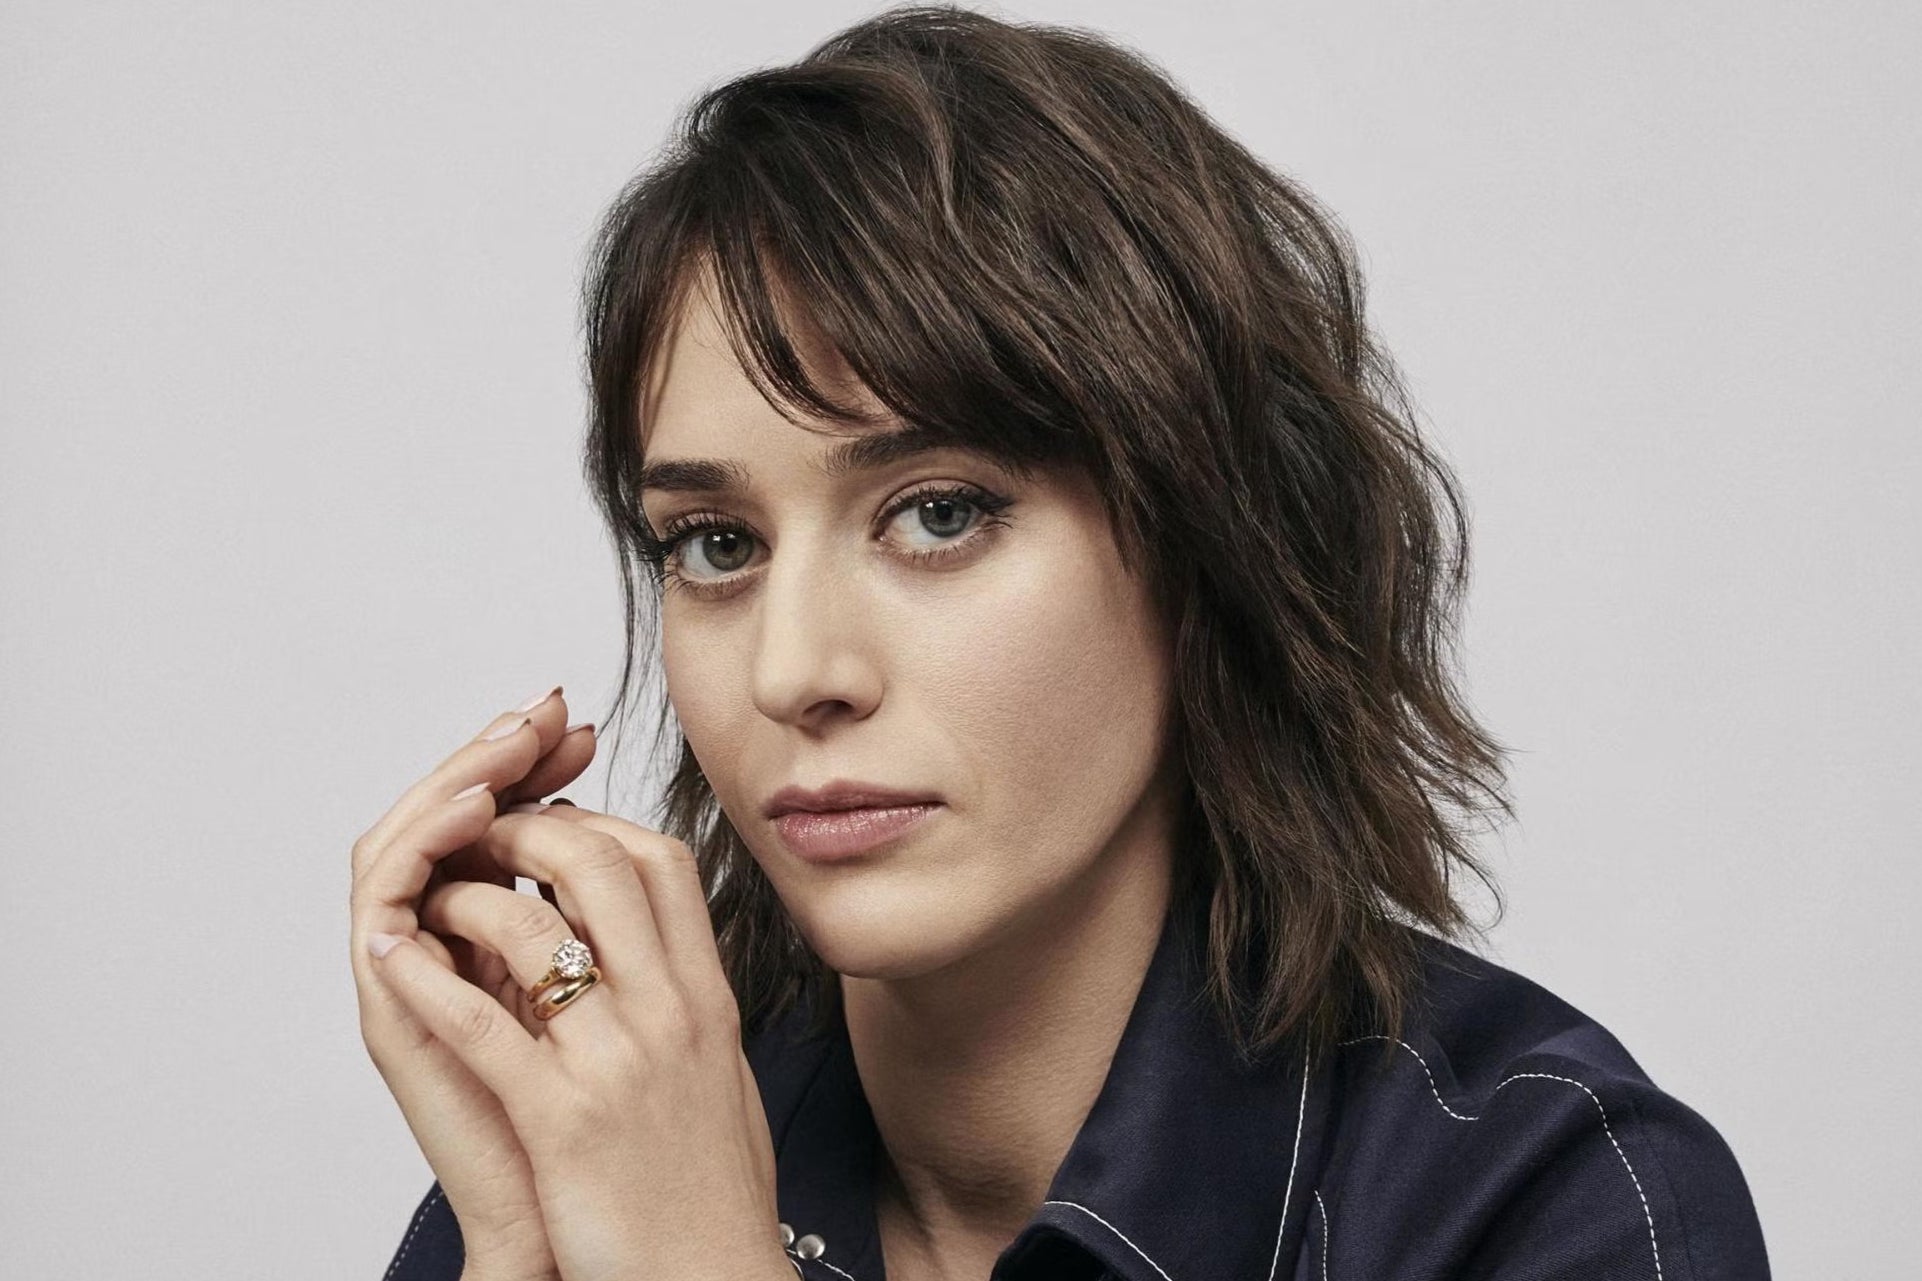 Lizzy Caplan: 'After Mean Girls, I didn't work again until I dyed